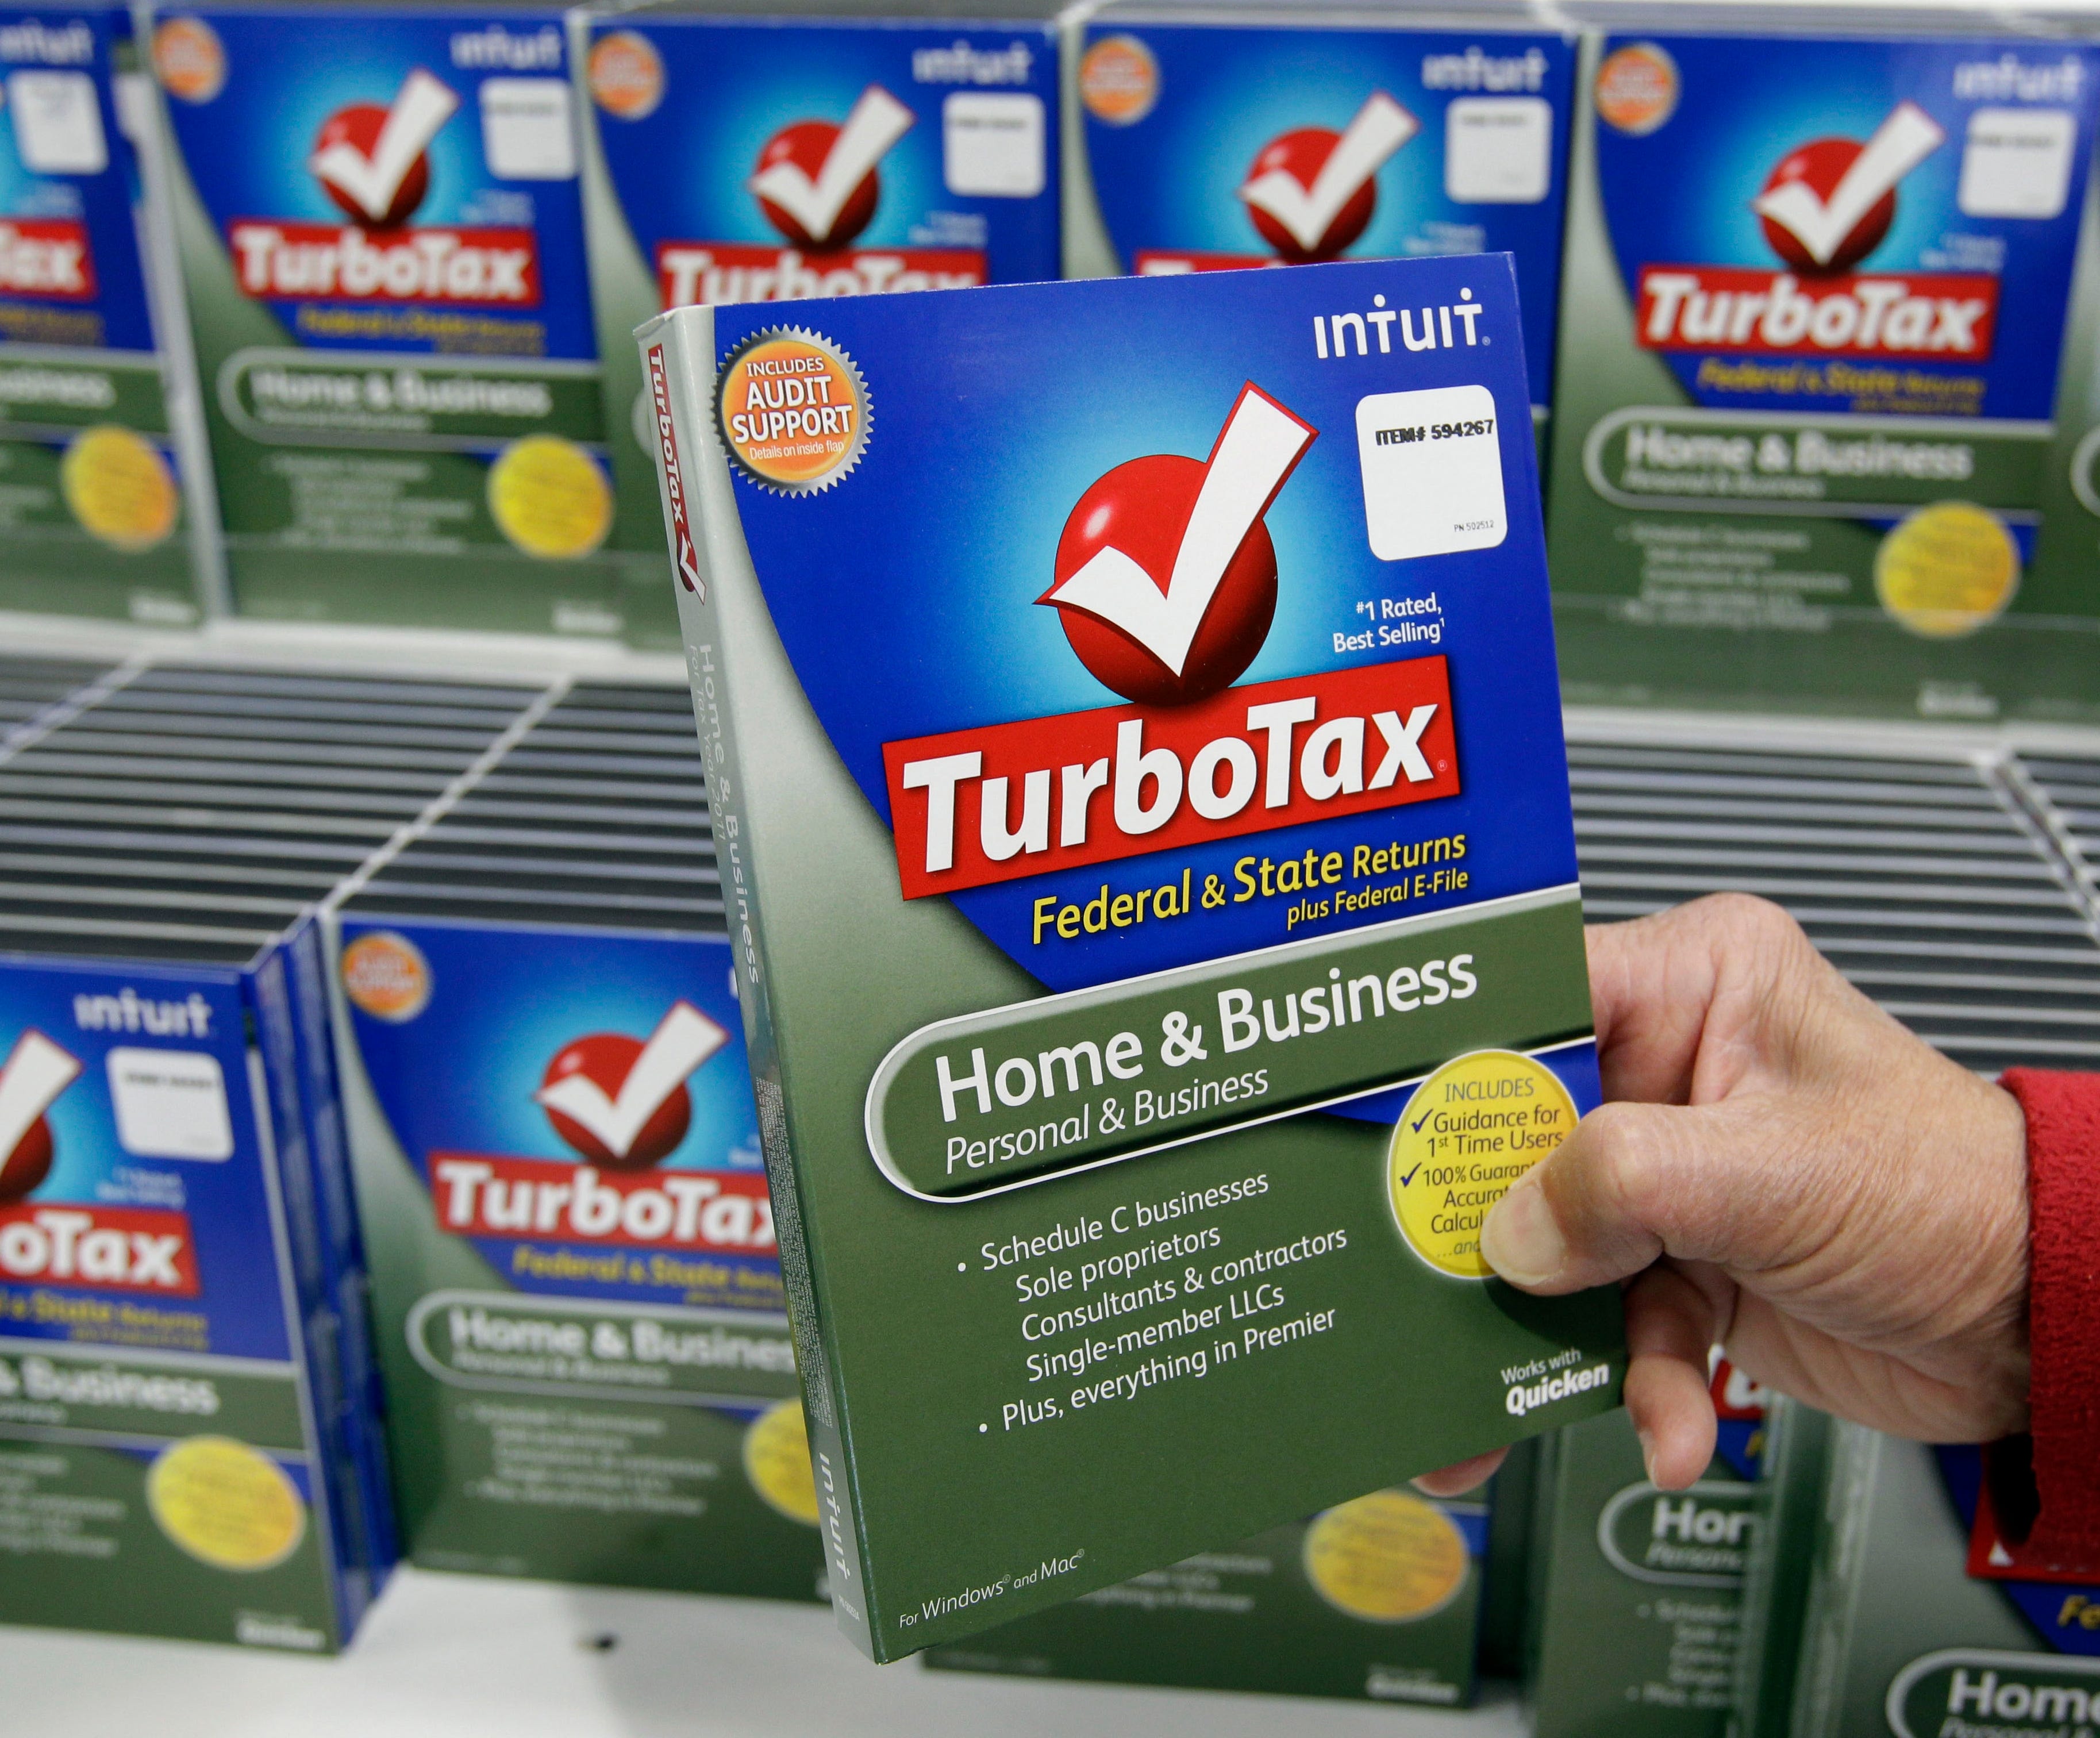 Turbotax 2017 home and business does not install luliapi